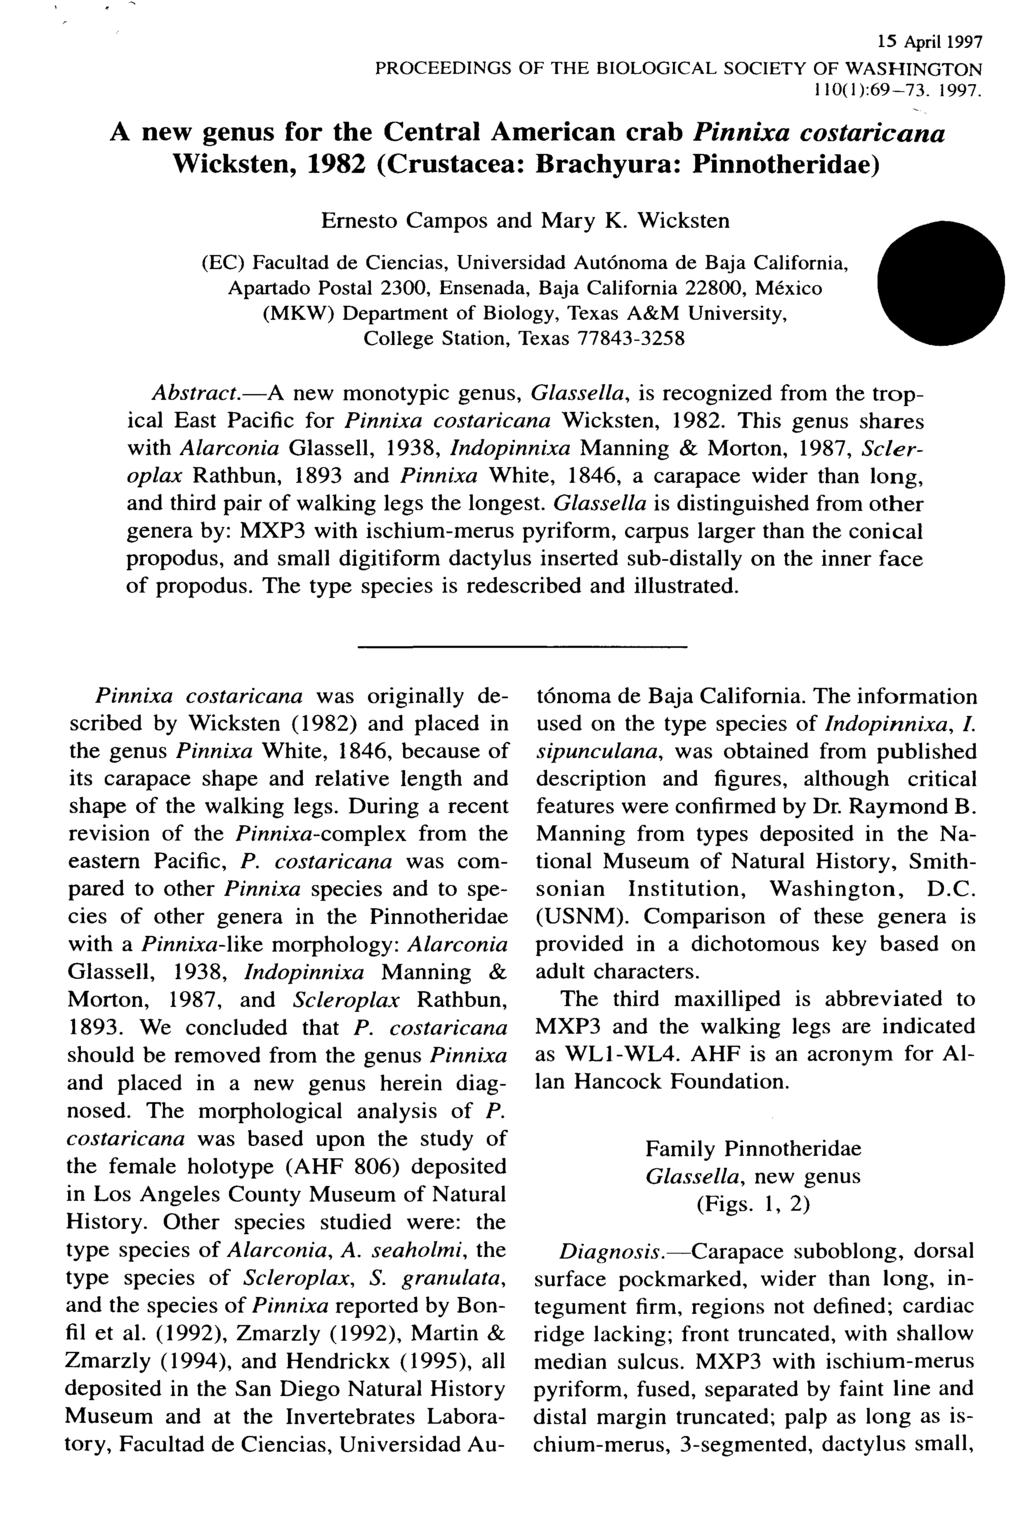 15 April 1997 PROCEEDINGS OF THE BIOLOGICAL SOCIETY OF WASHINGTON 110(1 ):69-73. 1997. A new genus for the Central American crab Pinnixa costaricana Wicksten, 1982 (Crustacea: Brachyura: Pinnotheridae) Ernesto Campos and Mary K.